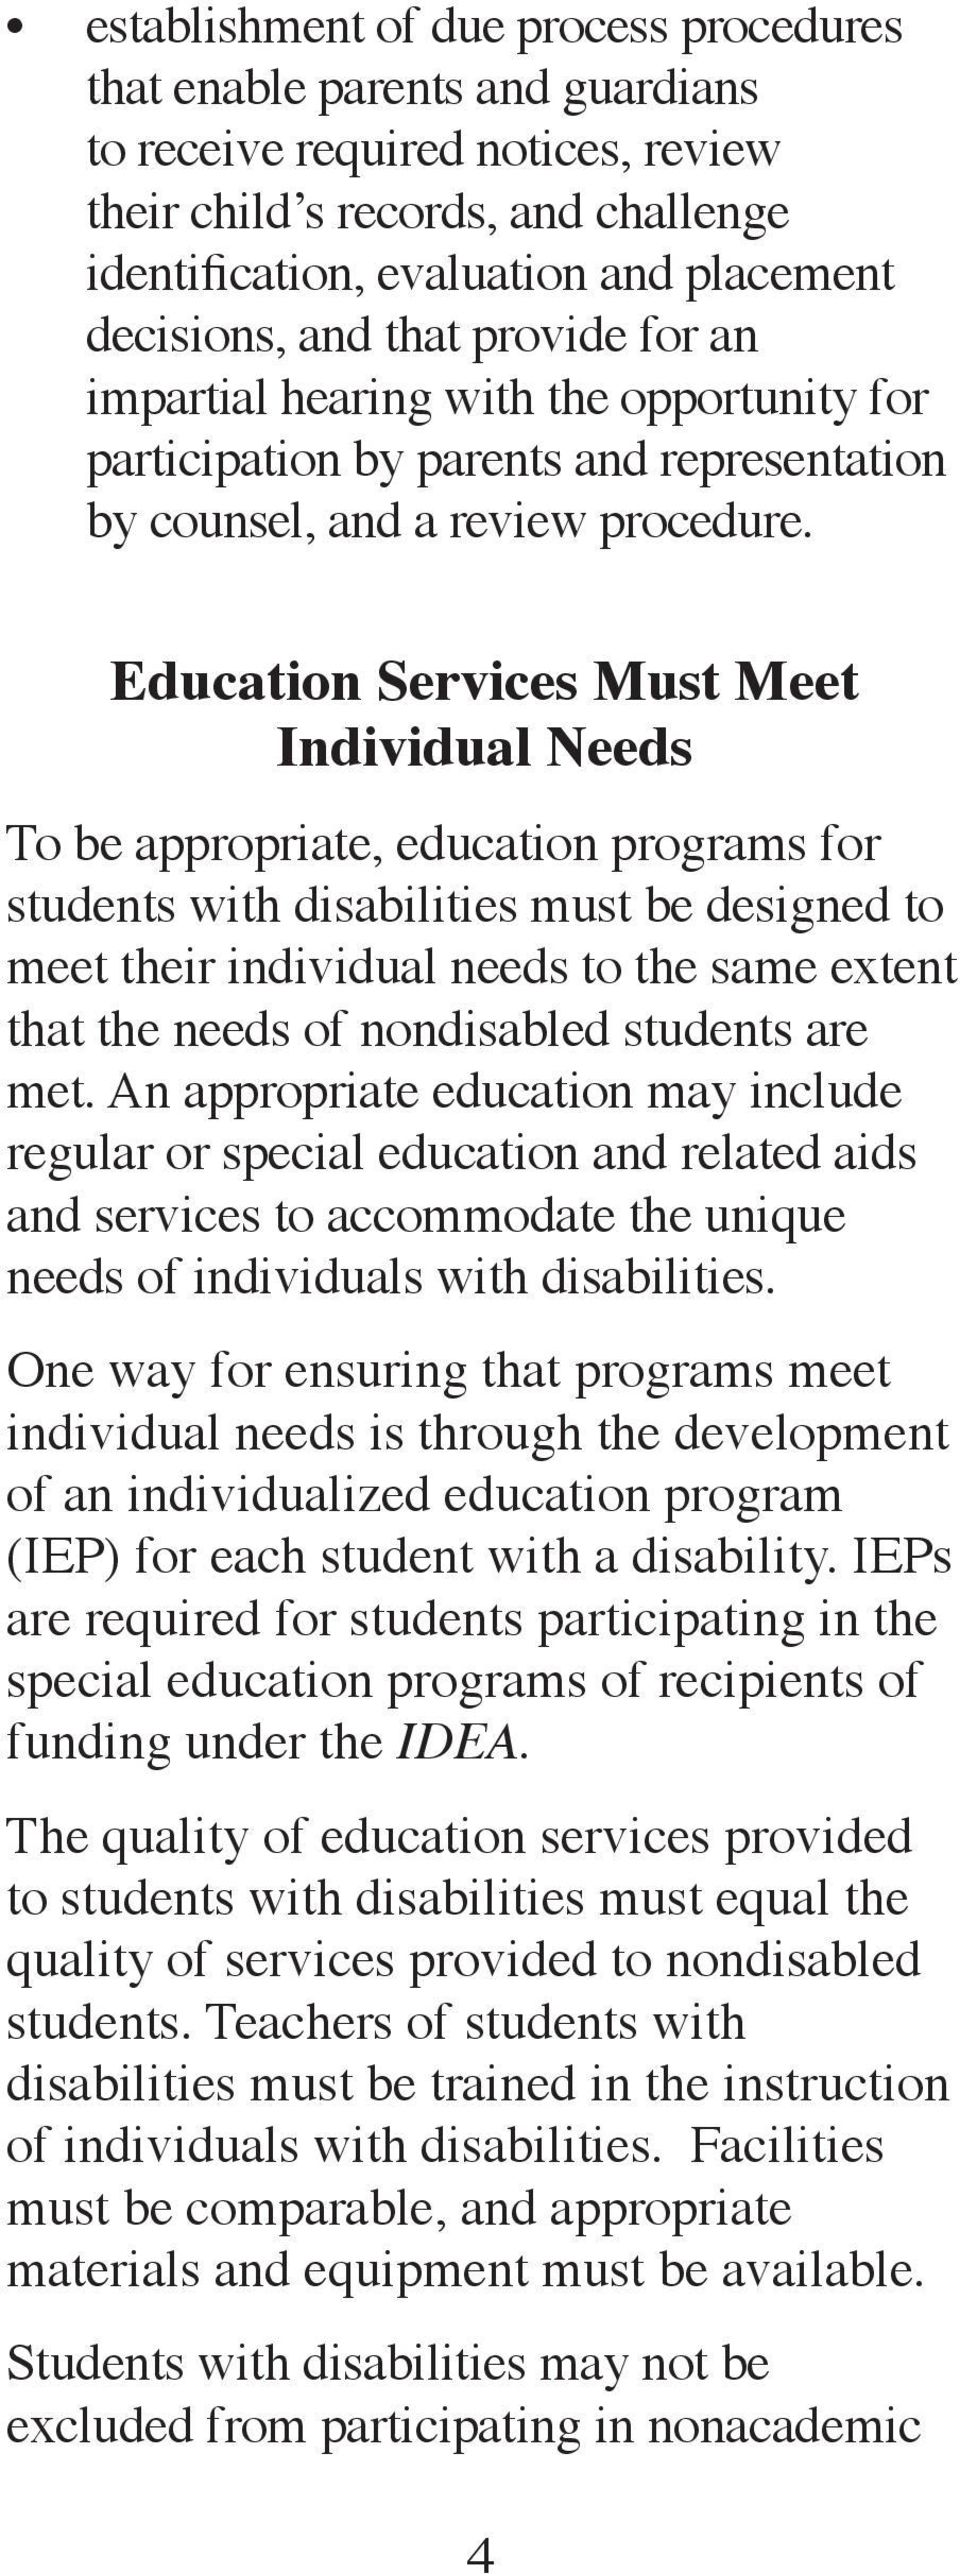 Education Services Must Meet Individual Needs To be appropriate, education programs for students with disabilities must be designed to meet their individual needs to the same extent that the needs of